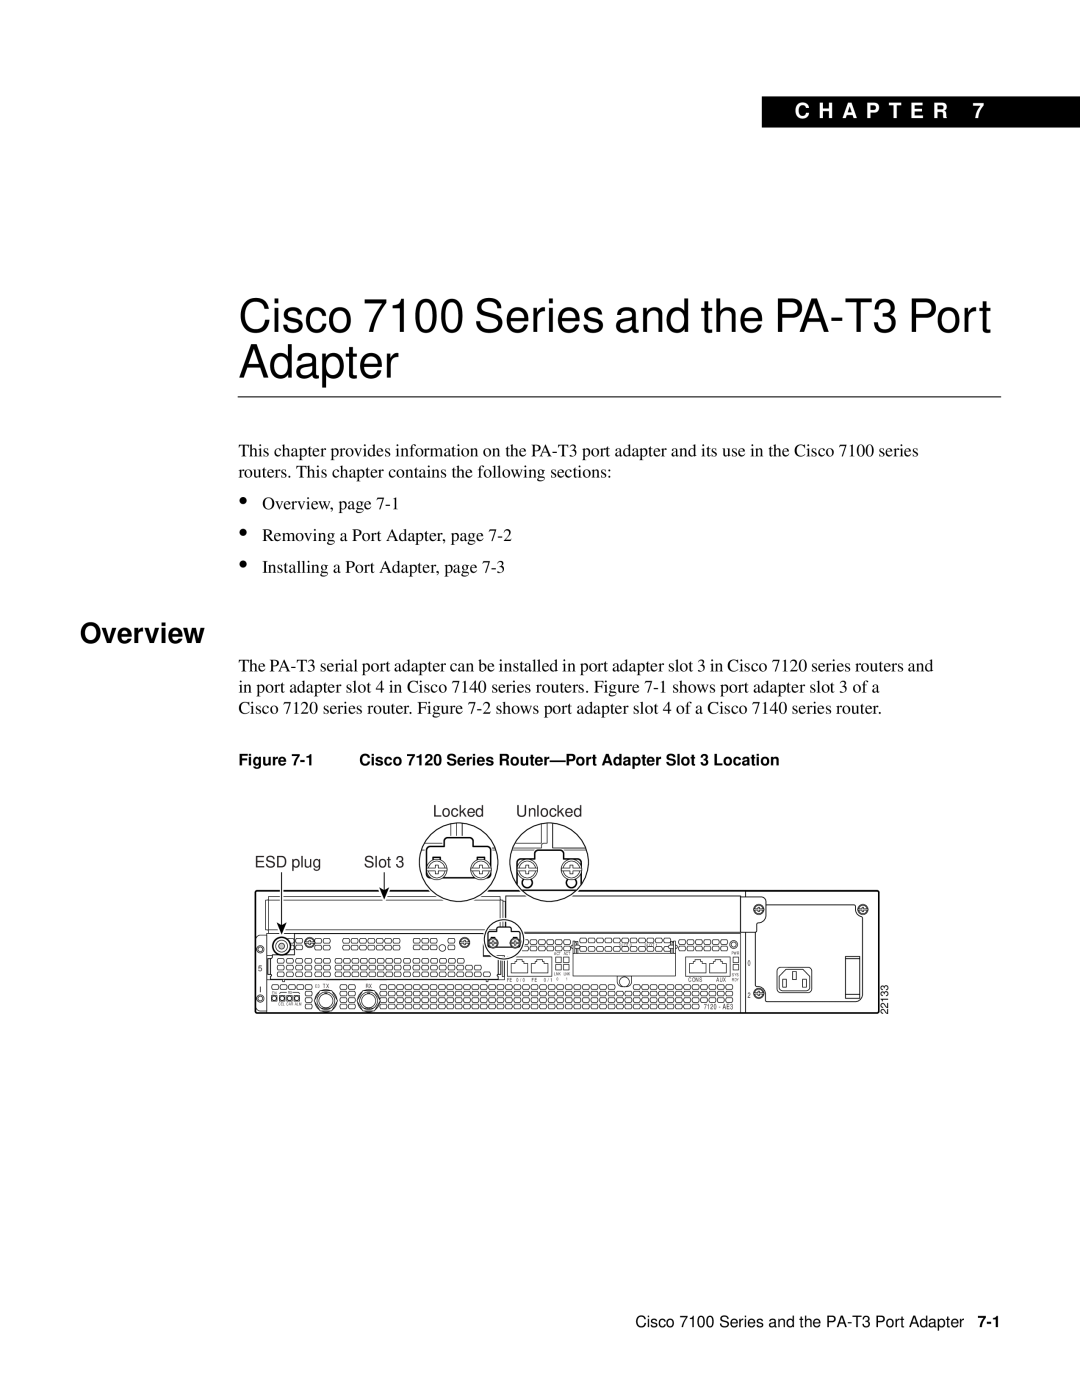 Cisco Systems manual Cisco 7100 Series and the PA-T3 Port Adapter, Overview, C H A P T E R 